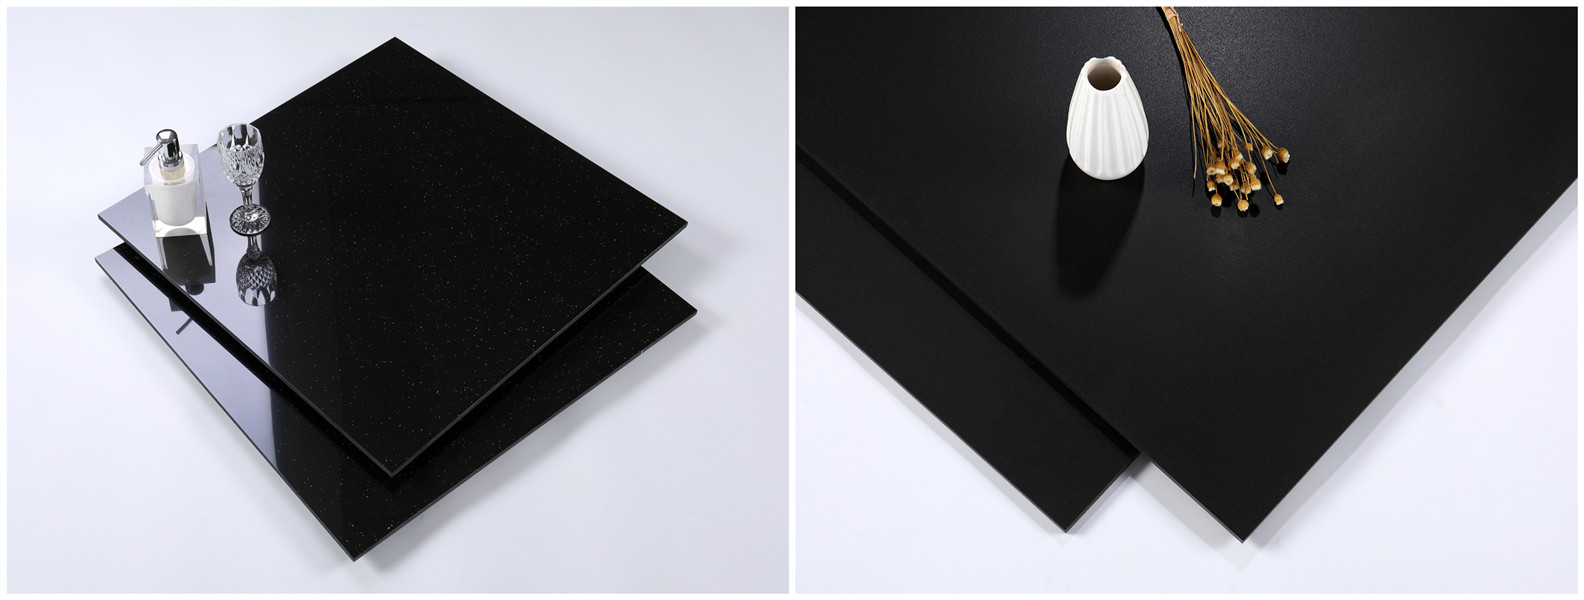 Polished vs. Matte Finish: Which Black Floor Tiles to Choose?